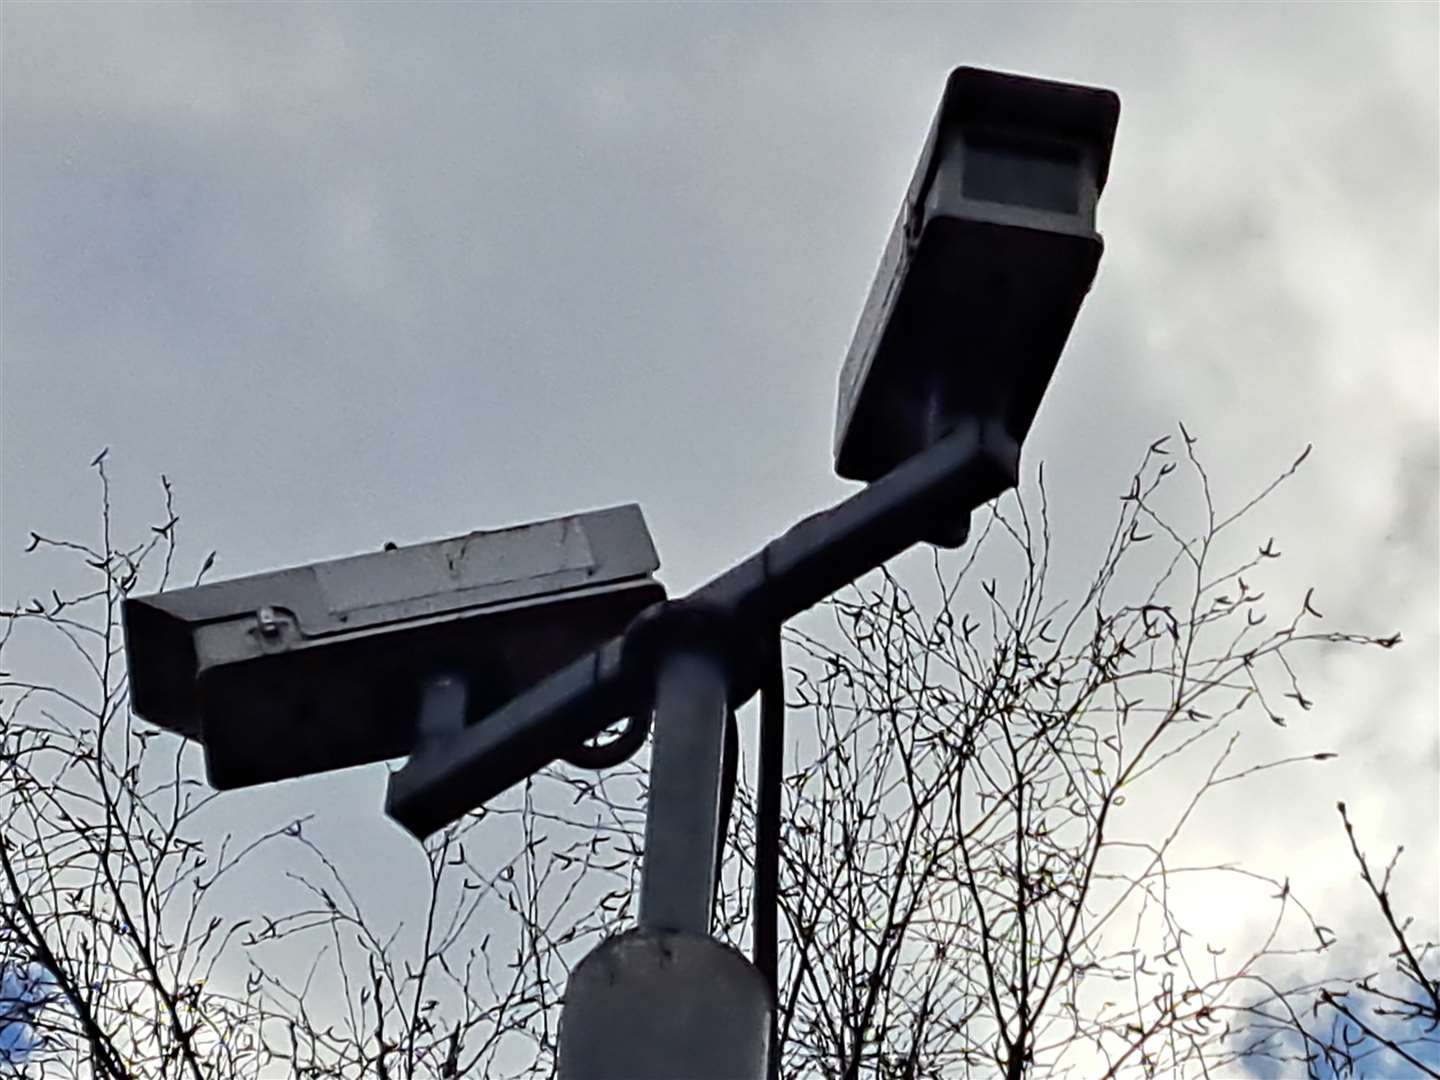 CCTV which covers the car park was used to try and identify some of the anti-social behaviour